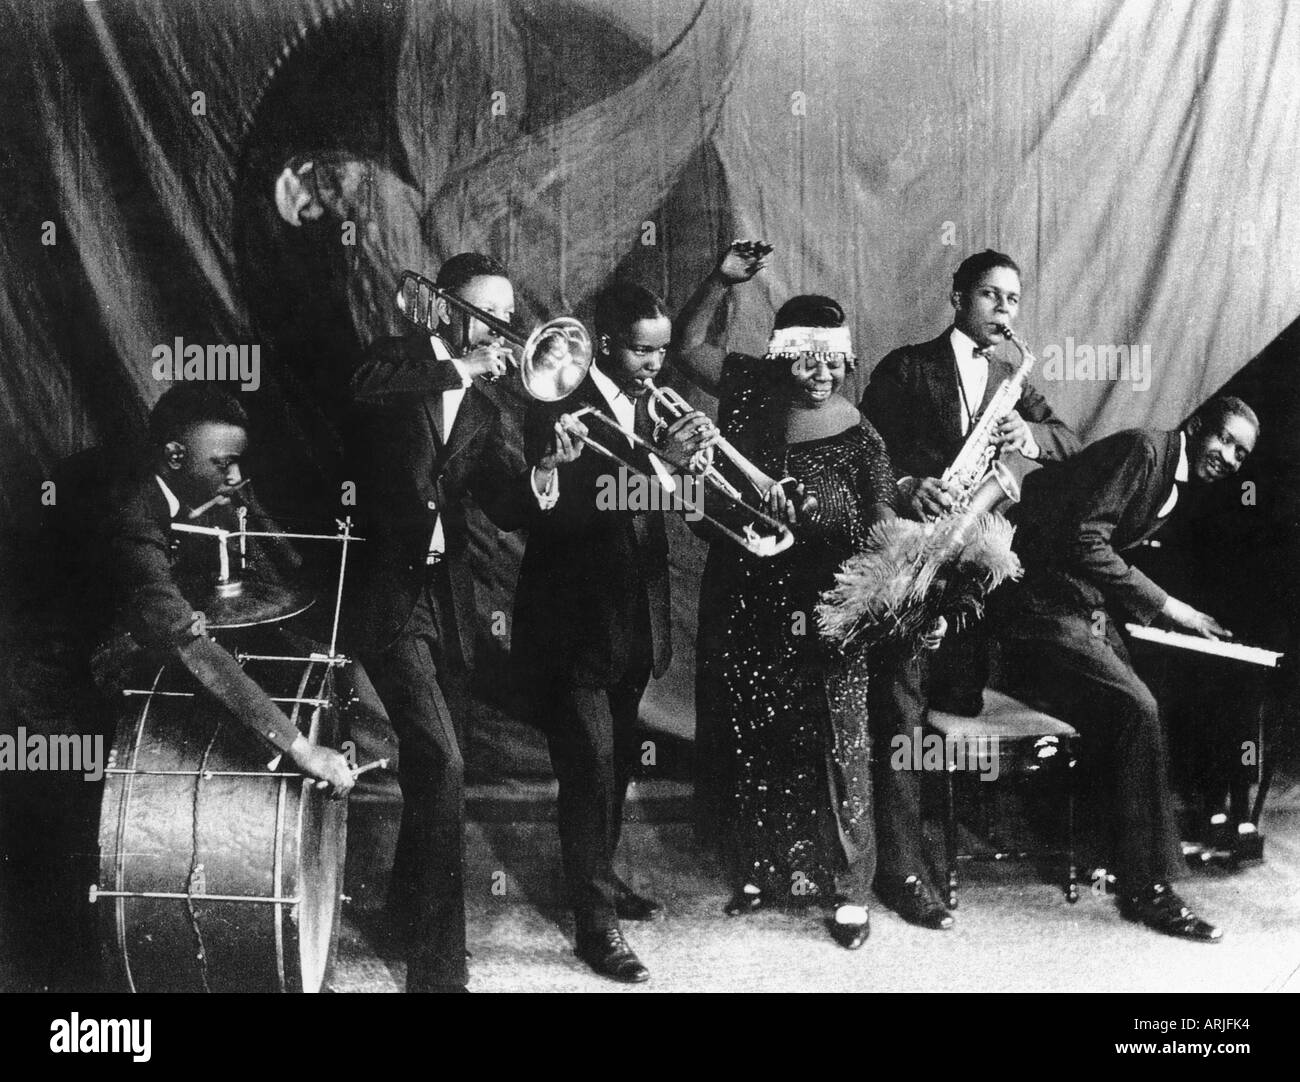 GERTRUDE 'MA' RAINEY (1886-1939) American  Blues singer the Wild Cats Jazz Band about 1928. The band's founder Thomas Dorsey is on piano. Stock Photo